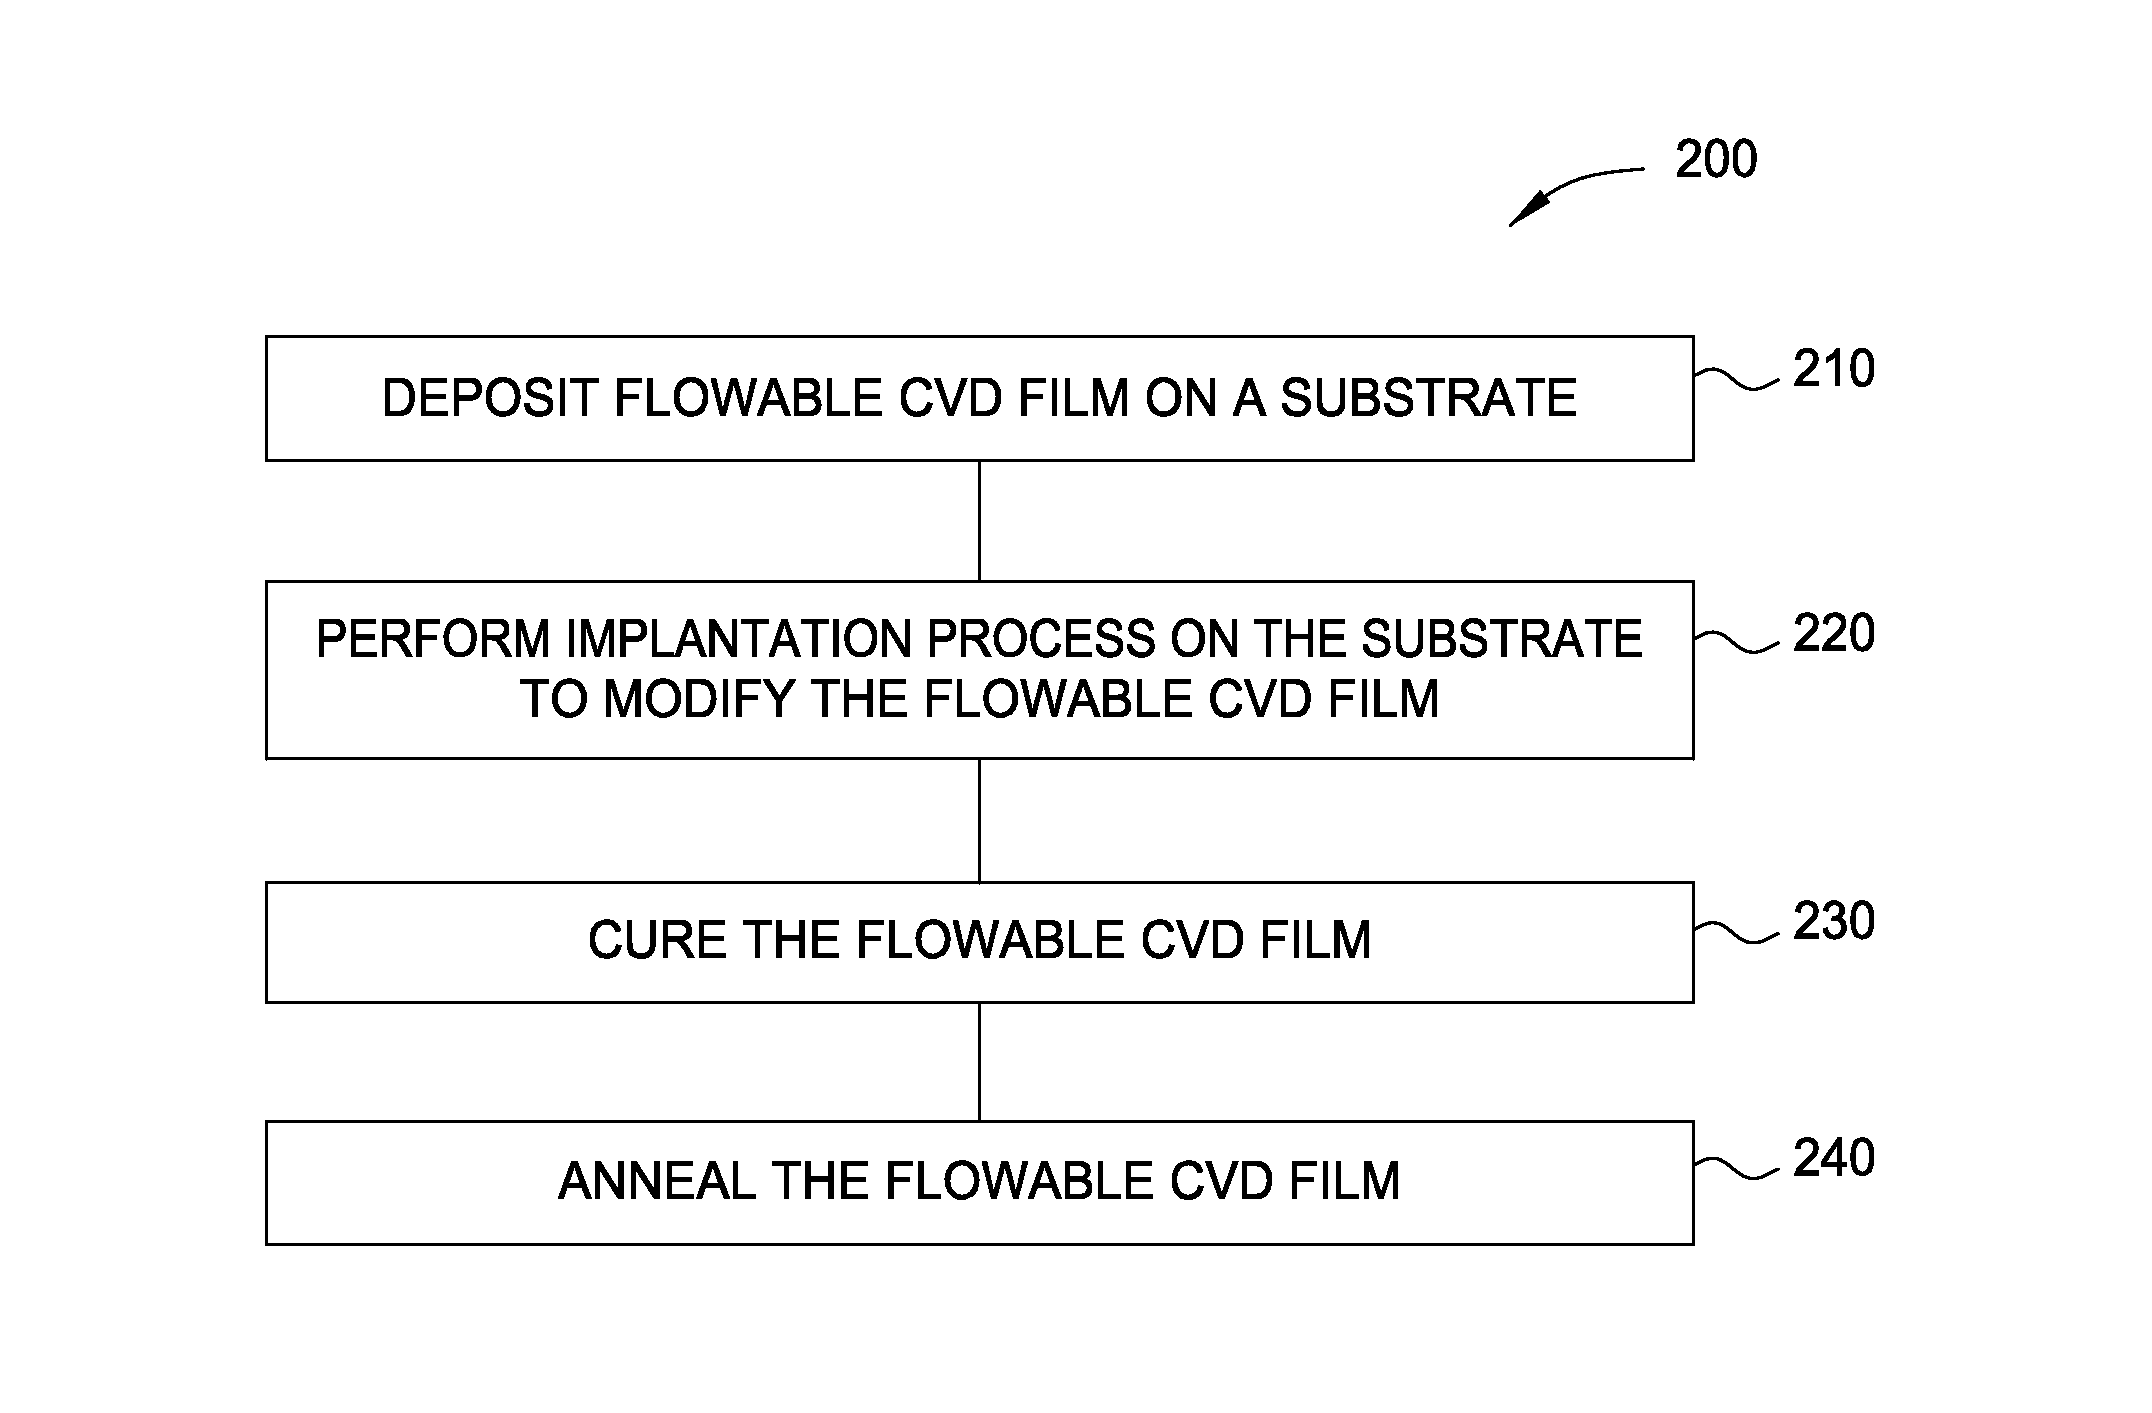 Advanced process flow for high quality fcvd films